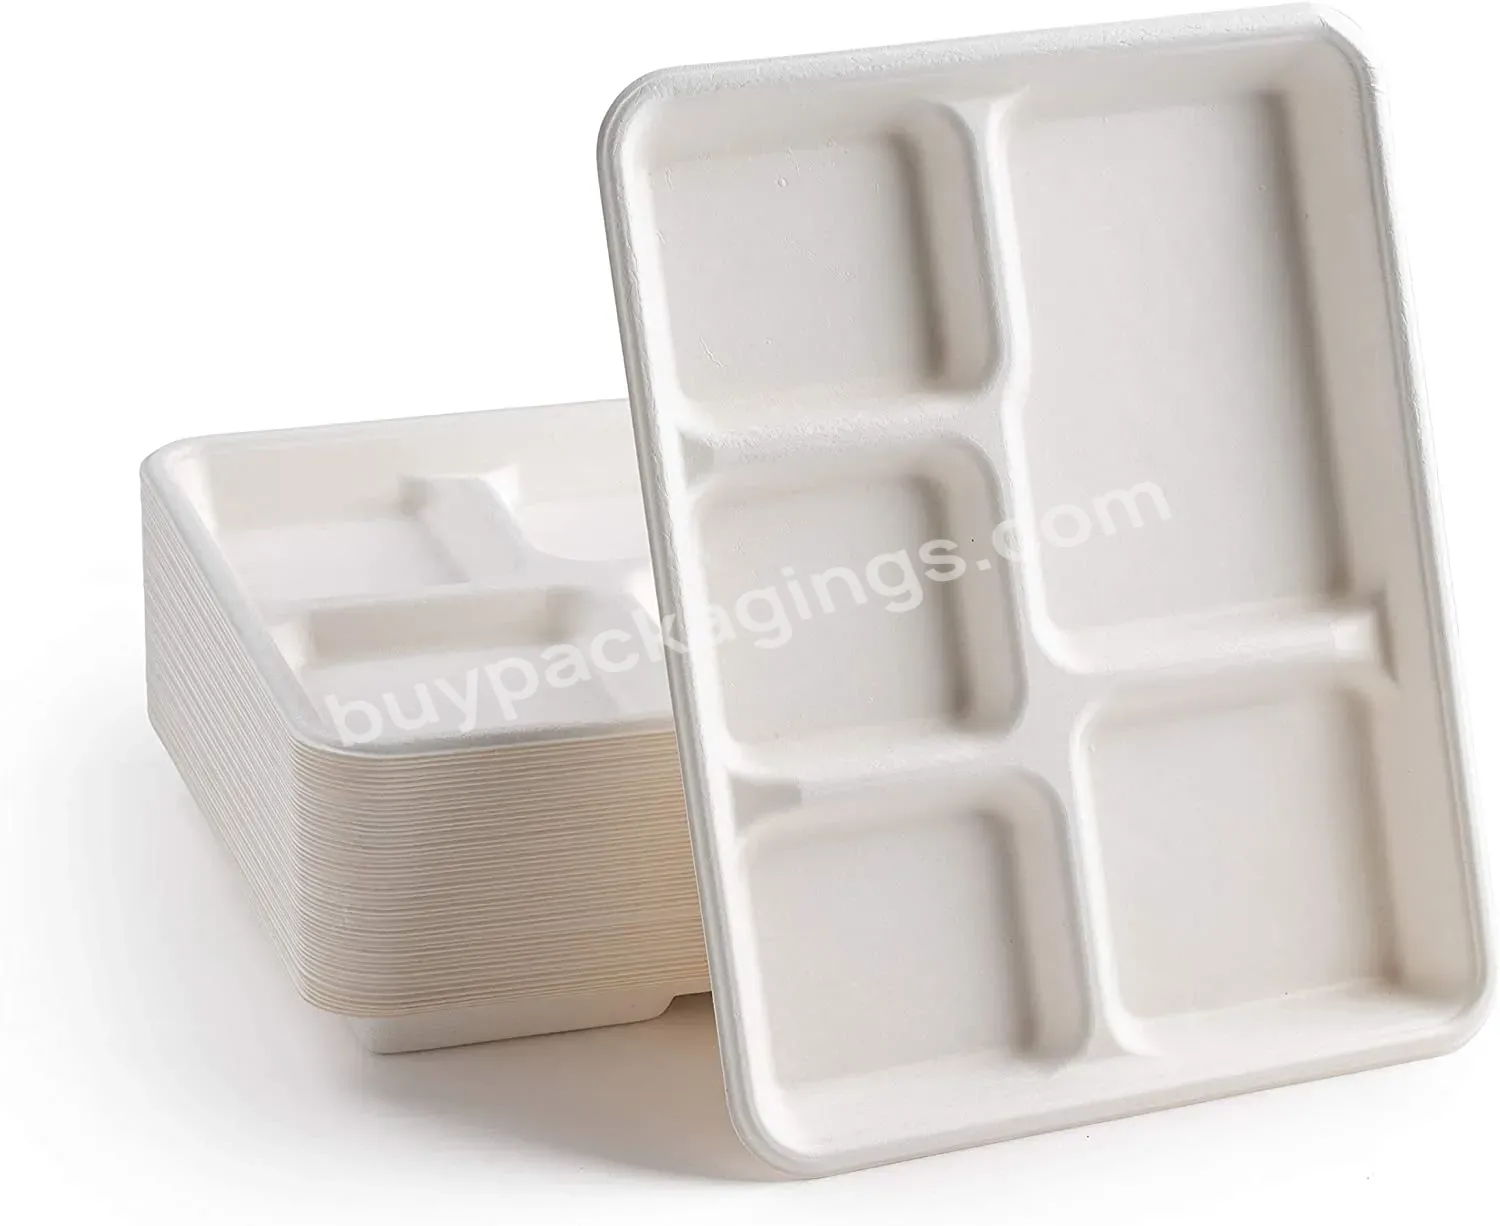 Eco-friendly 5 Compartment Disposable School Tray - Made From Bagasse Sugar Cane Fiber - Biodegradable Compostable - Buy 5 Compartment Disposable School Tray,Paper Plate,Bagasse Fiber Plate.